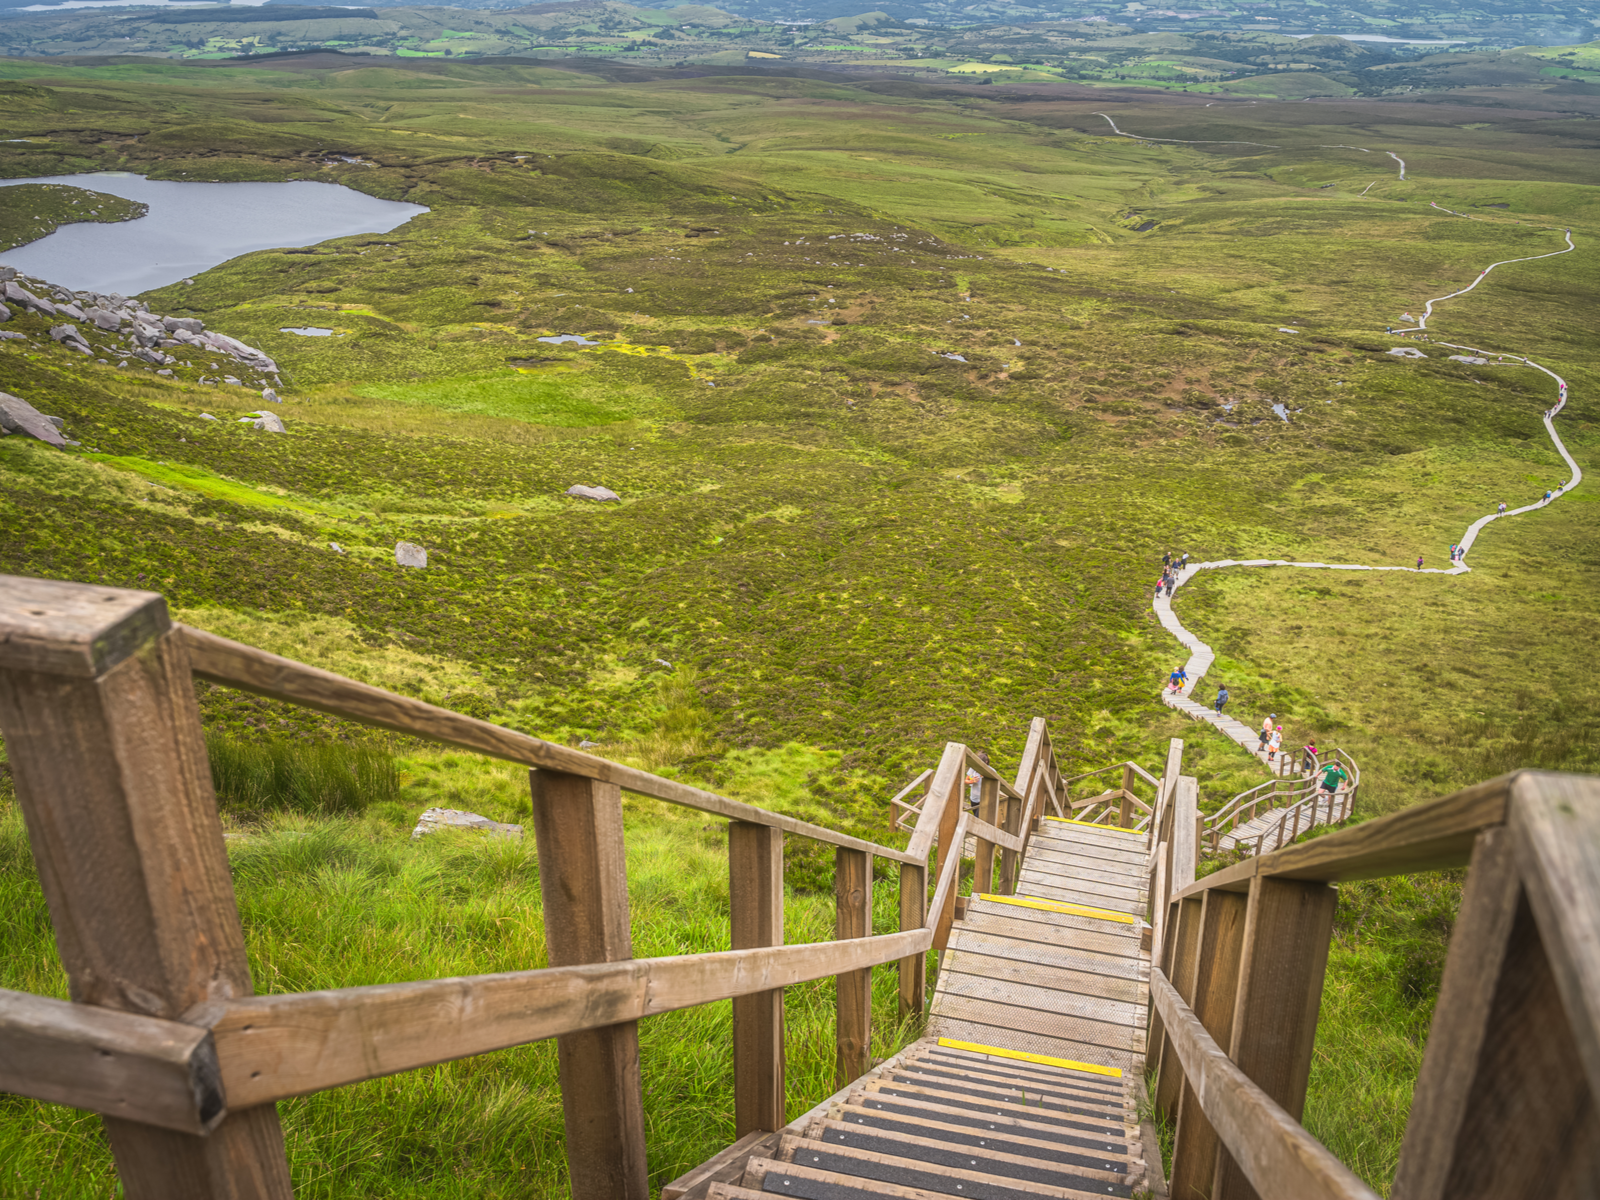 People climbing down the long winding boardwalk trail circled about by green pasture at Cuilcagh Legnabrocky Trail, one of the best hikes in Ireland